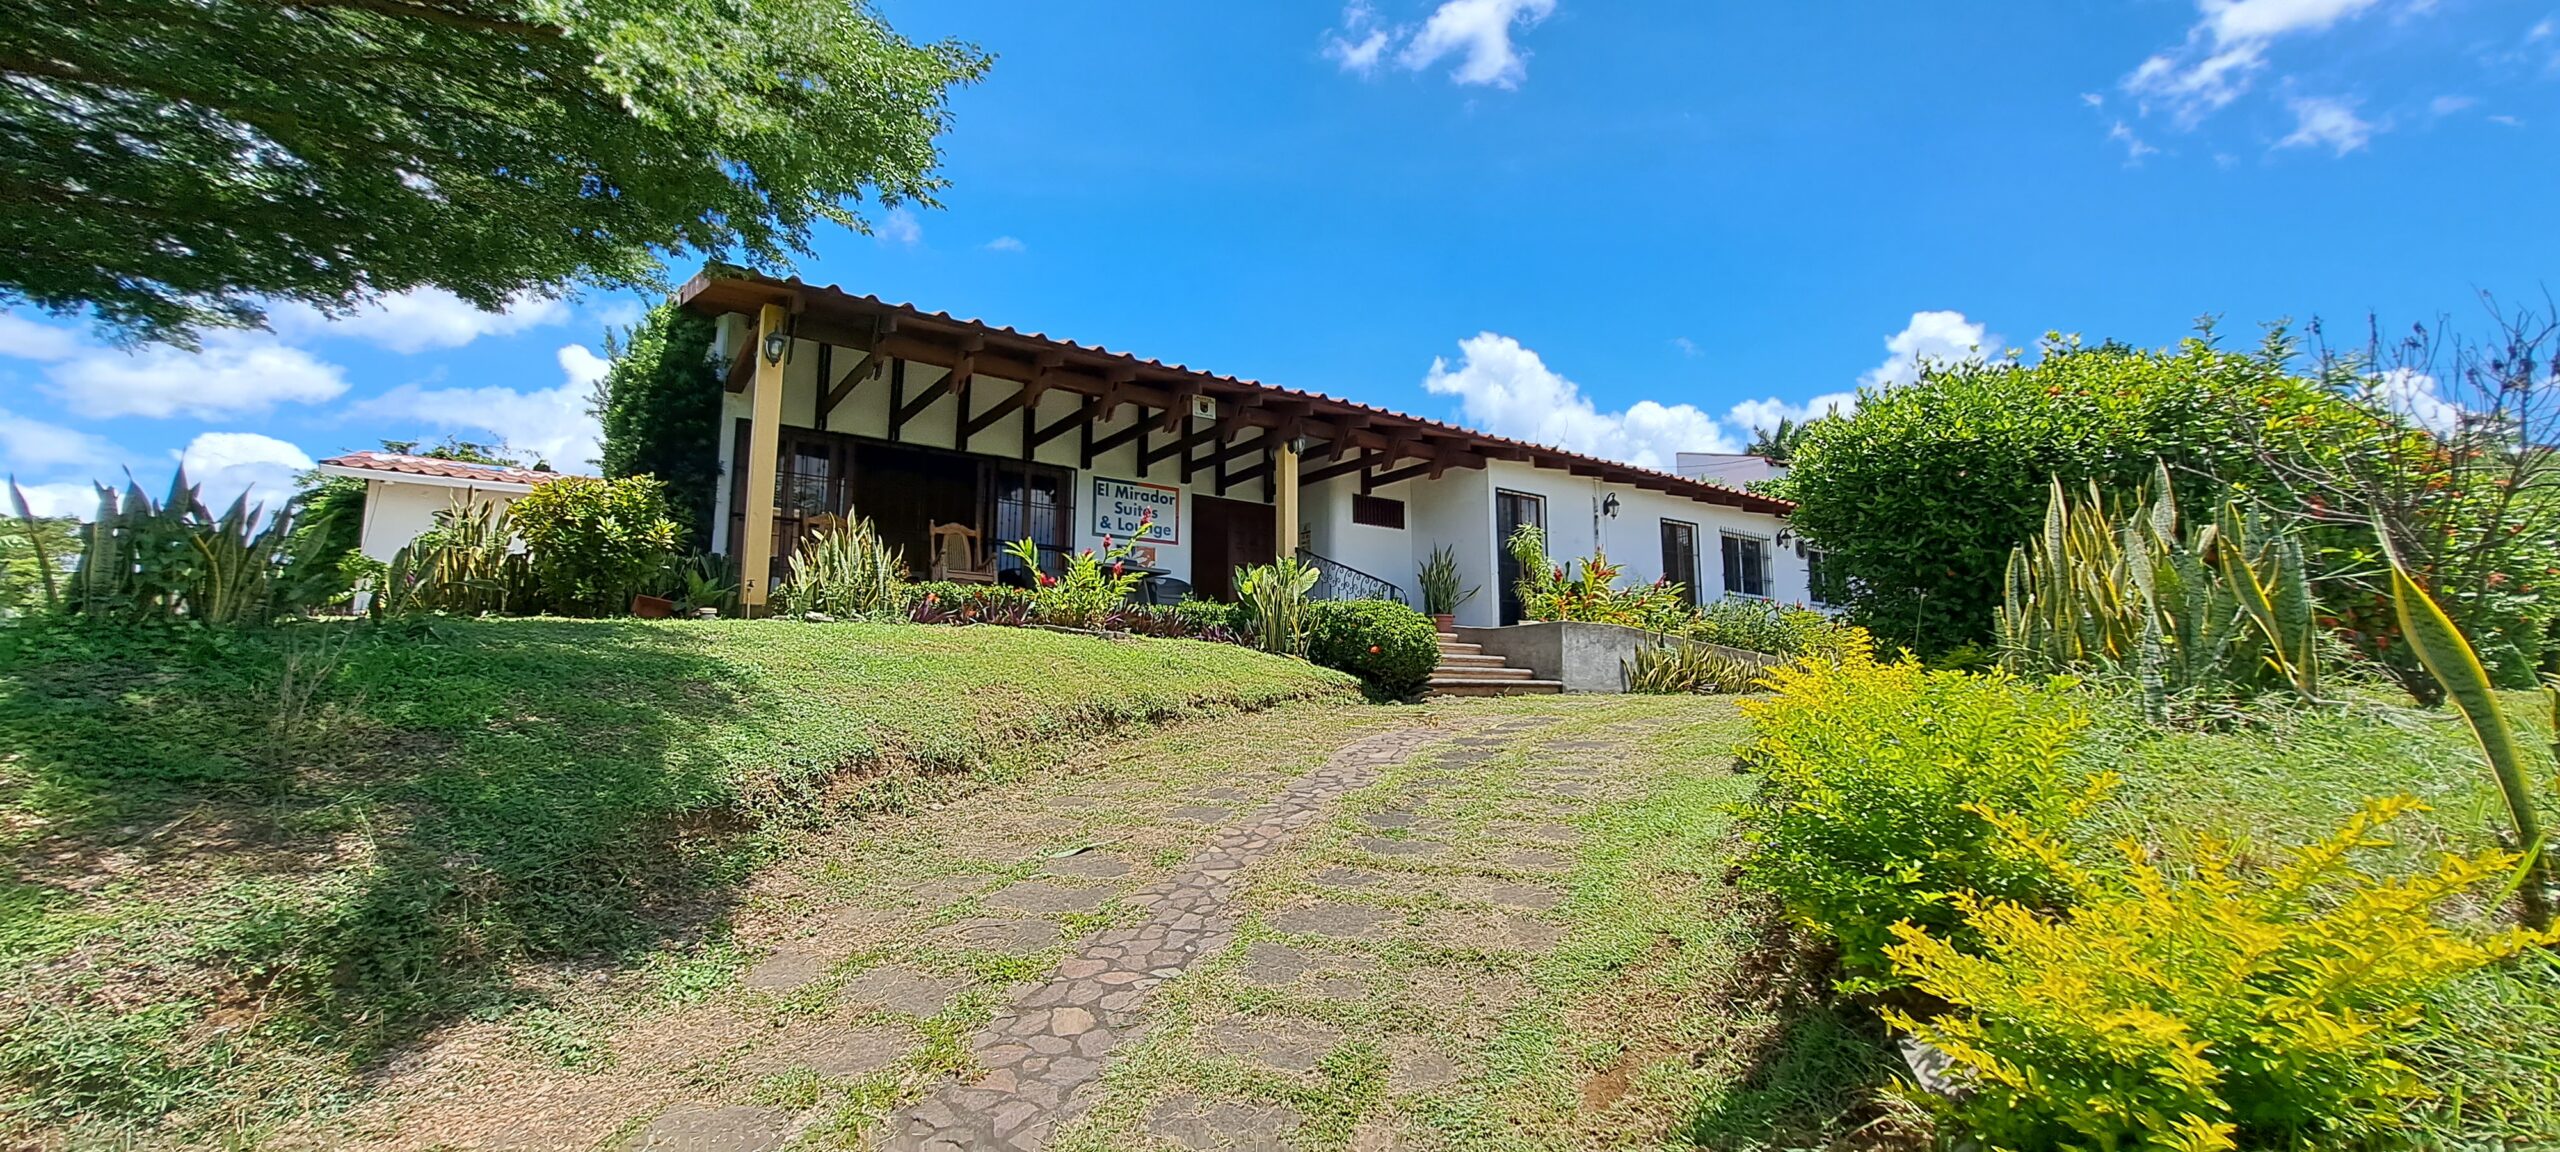 Boutique Hotel Airbnb with 4 Suites in Managua